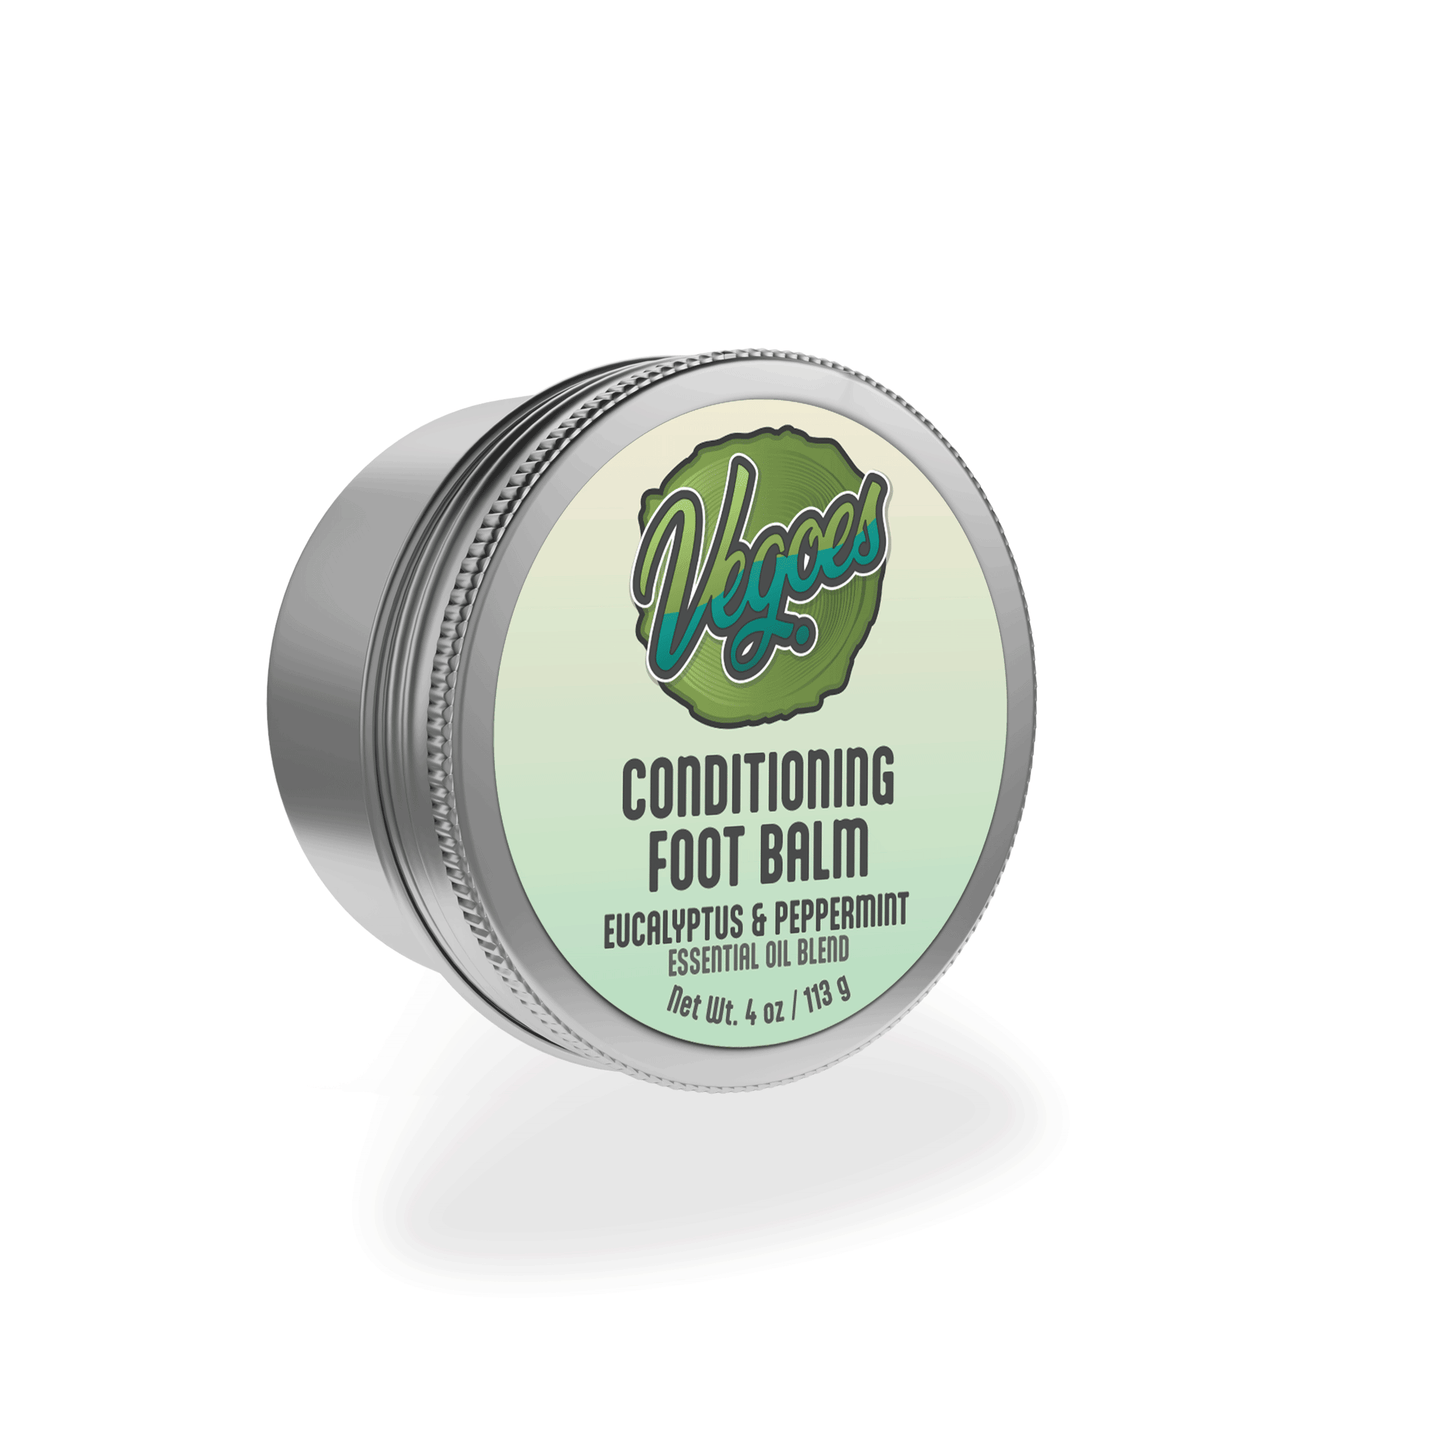 Conditioning Foot Balm